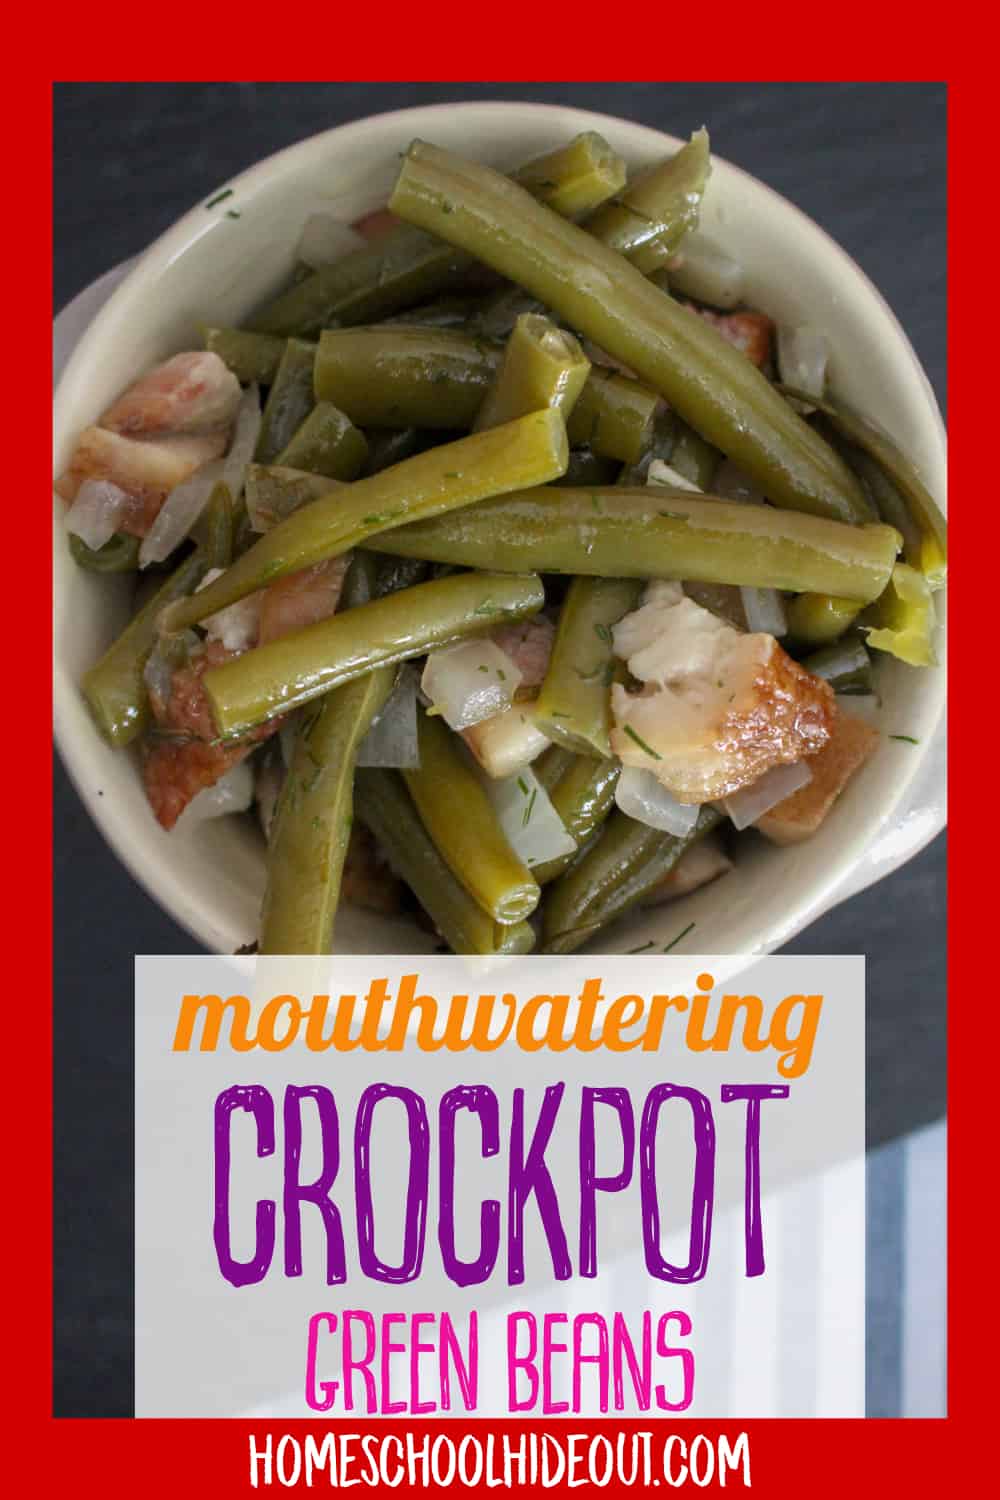 Whip up these mouthwatering green beans in the CrockPot before work! You'll have a delicious side waiting for you when you get home. #dinner #healthy #slowcooker #CrockPot #easymeals #quickdinners #sides #crockpotsides #slowcookersides #greenbeans